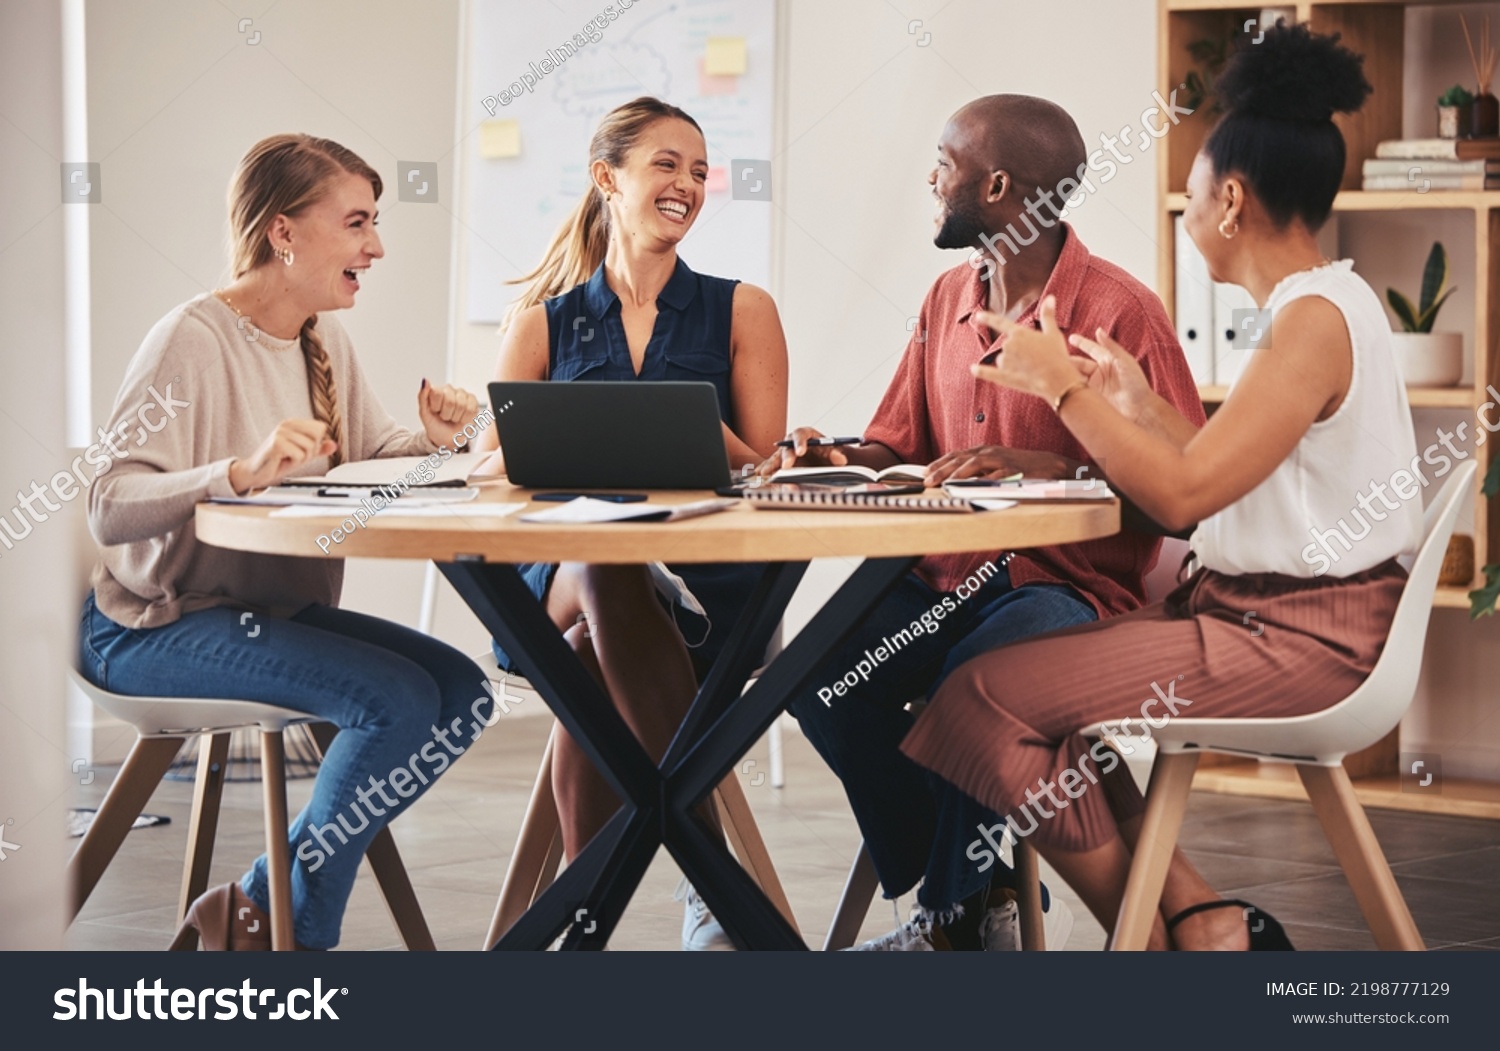 Meeting with collaboration, teamwork and planning from marketing team working in social media and content creation. Support, strategy and communication as startup business people mind map new idea #2198777129